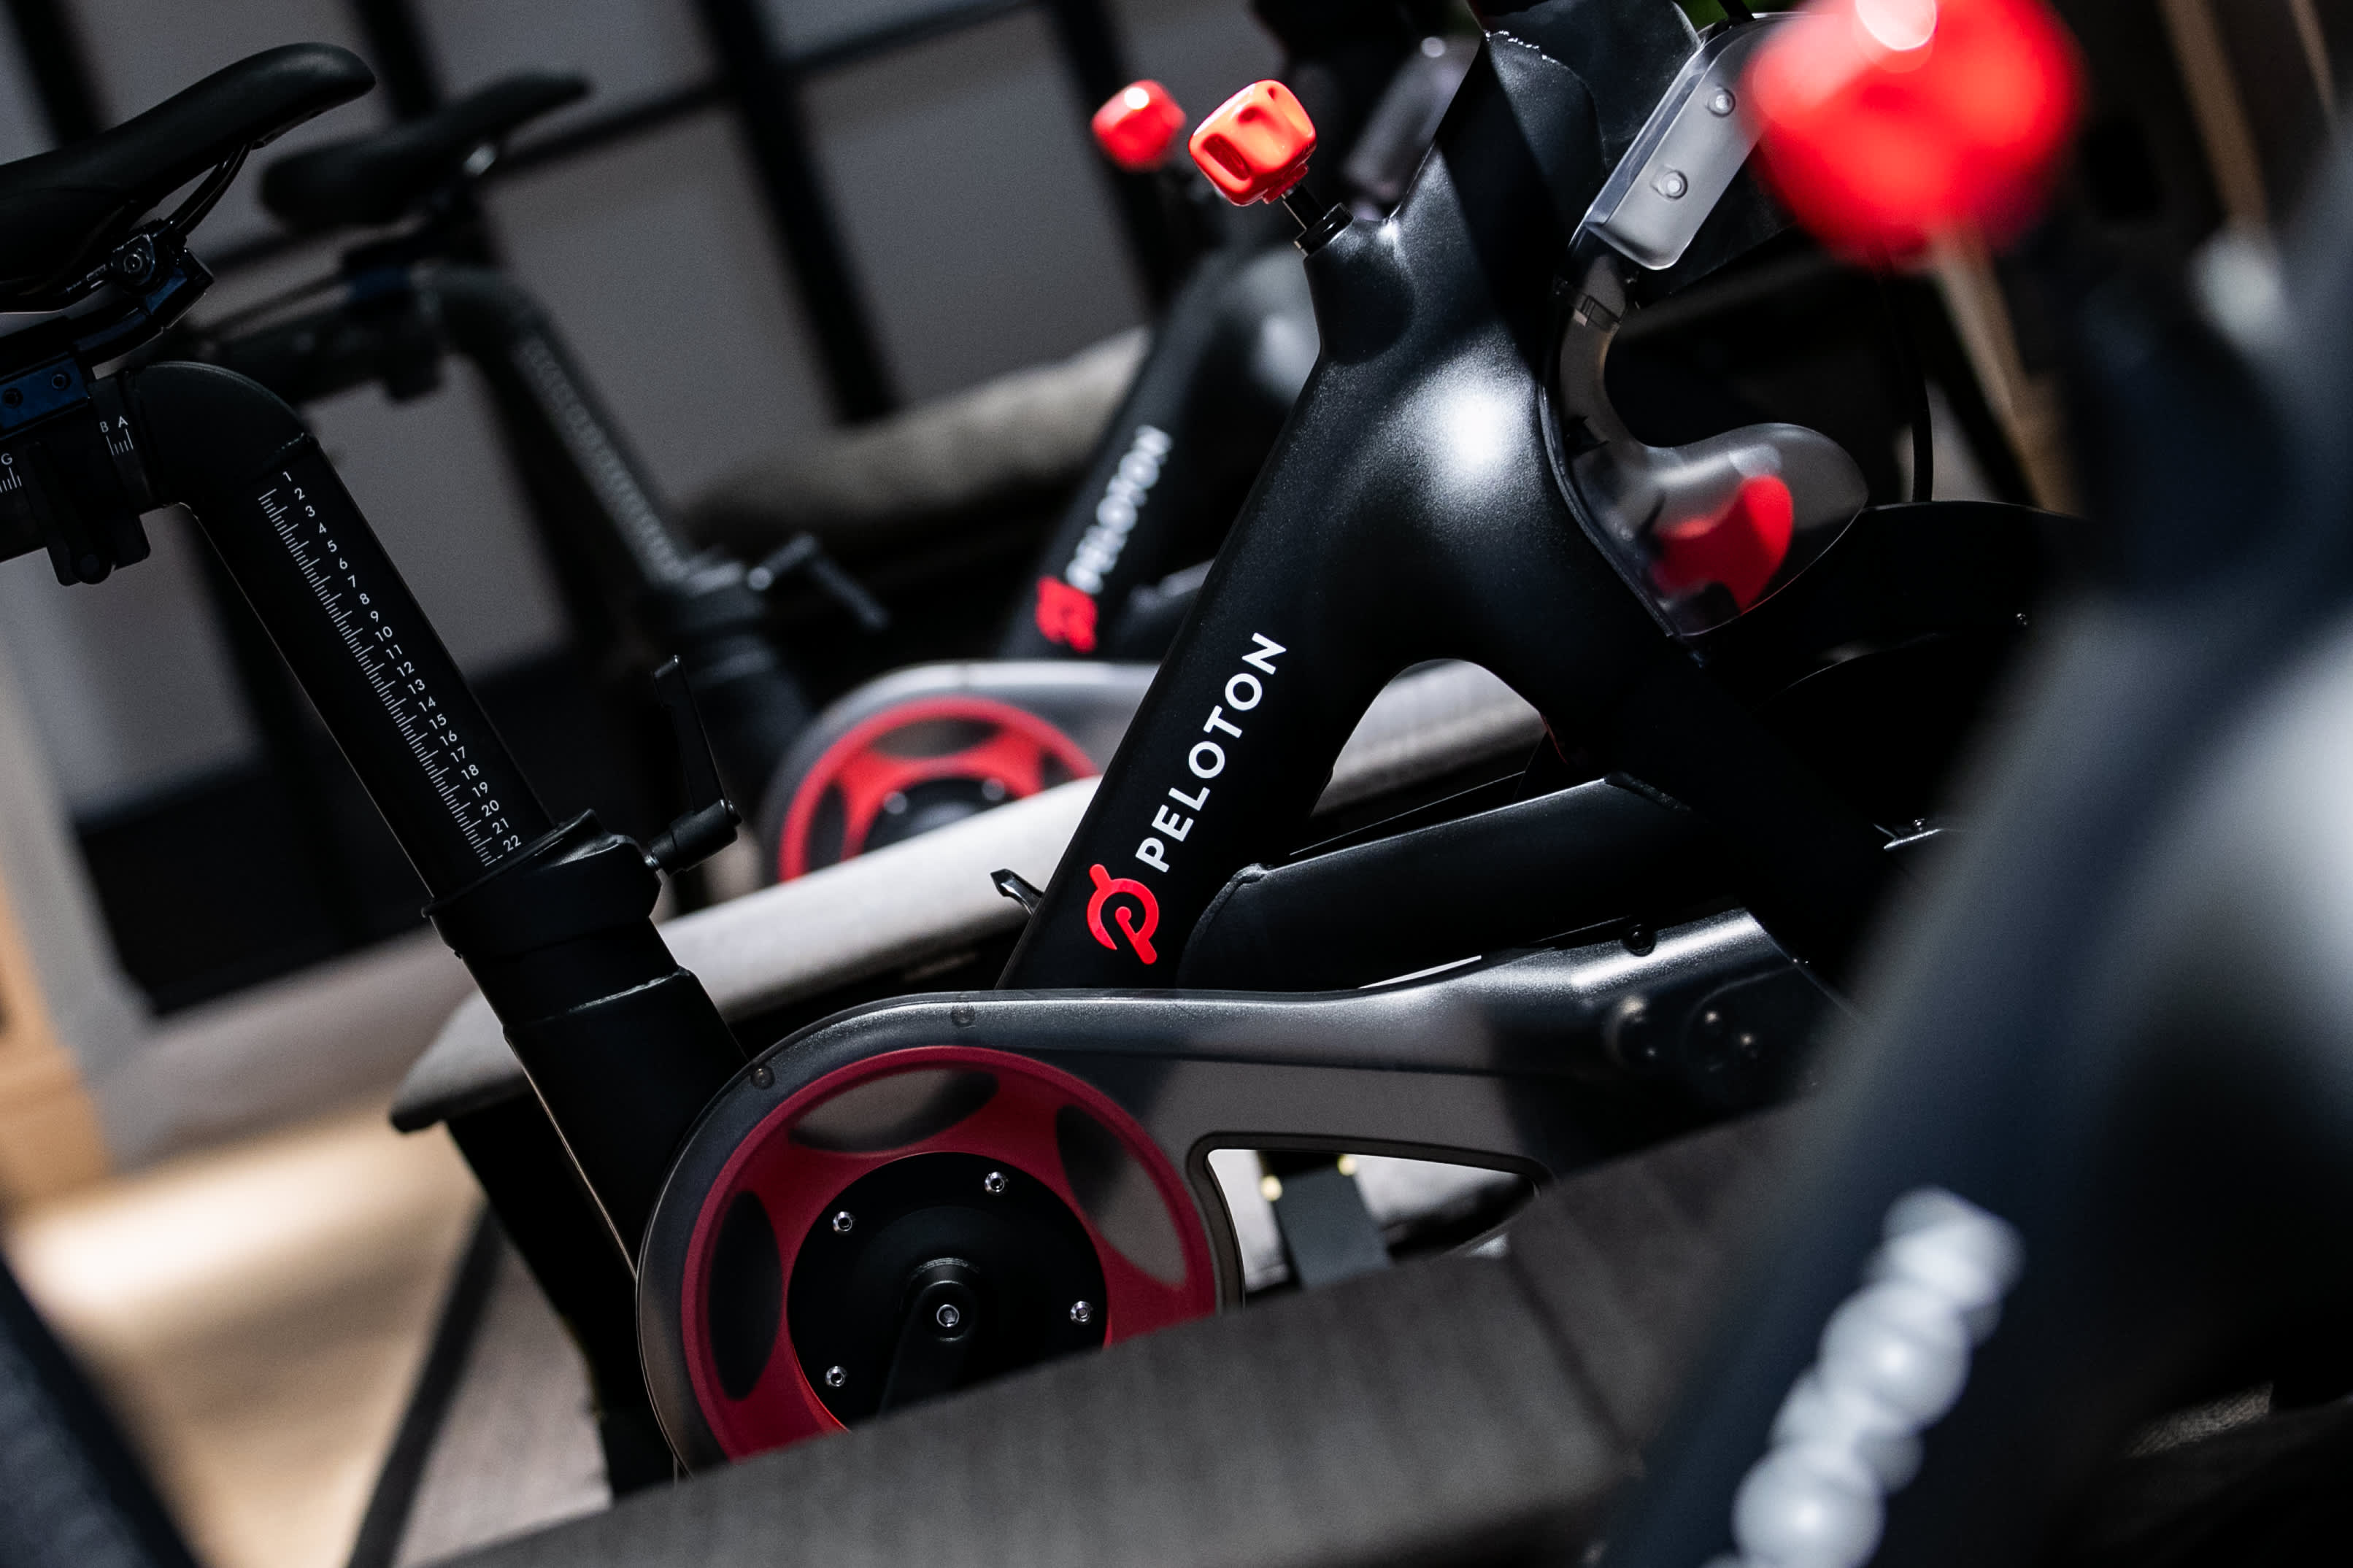 Peloton's brand gets slammed again after an unfavorable portrayal in 'Billions'